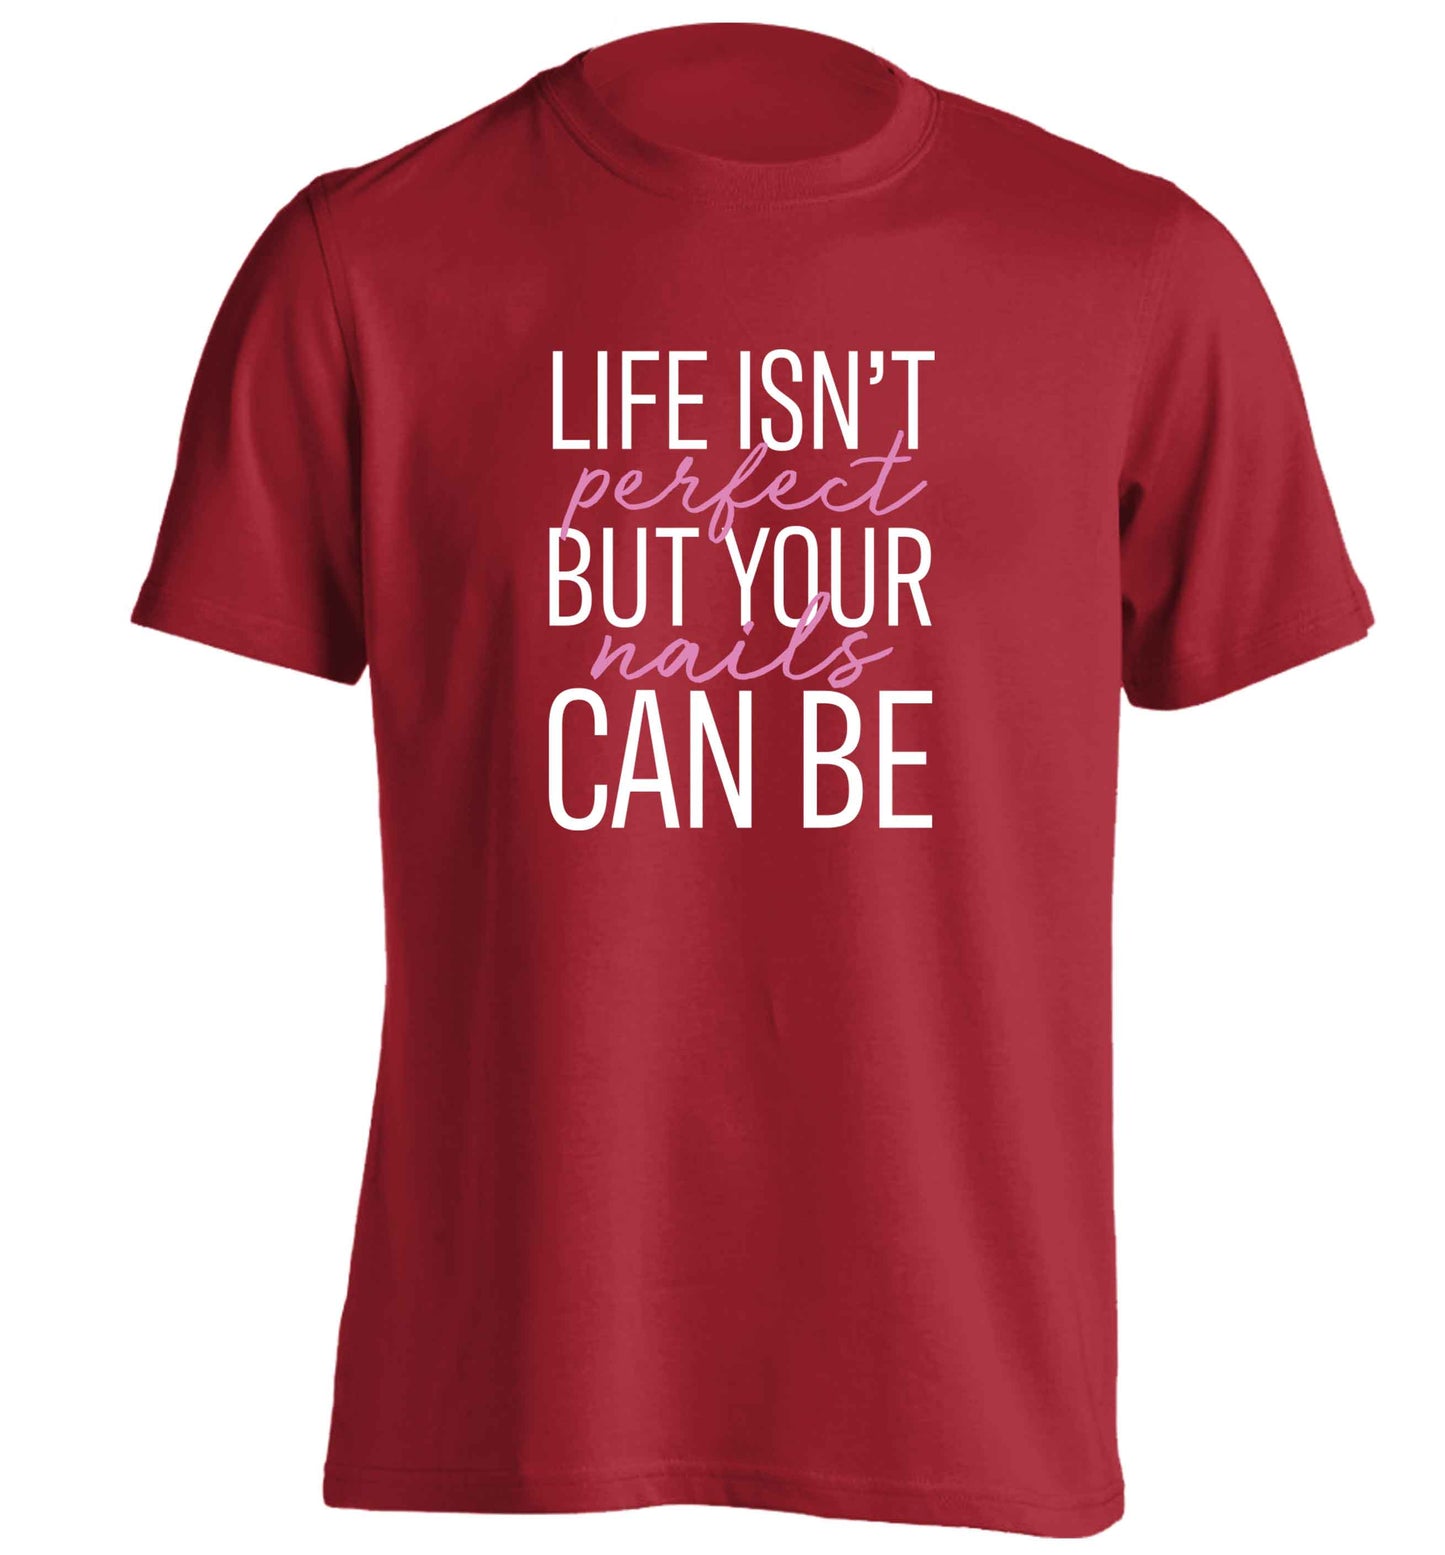 Life isn't perfect but your nails can be adults unisex red Tshirt 2XL